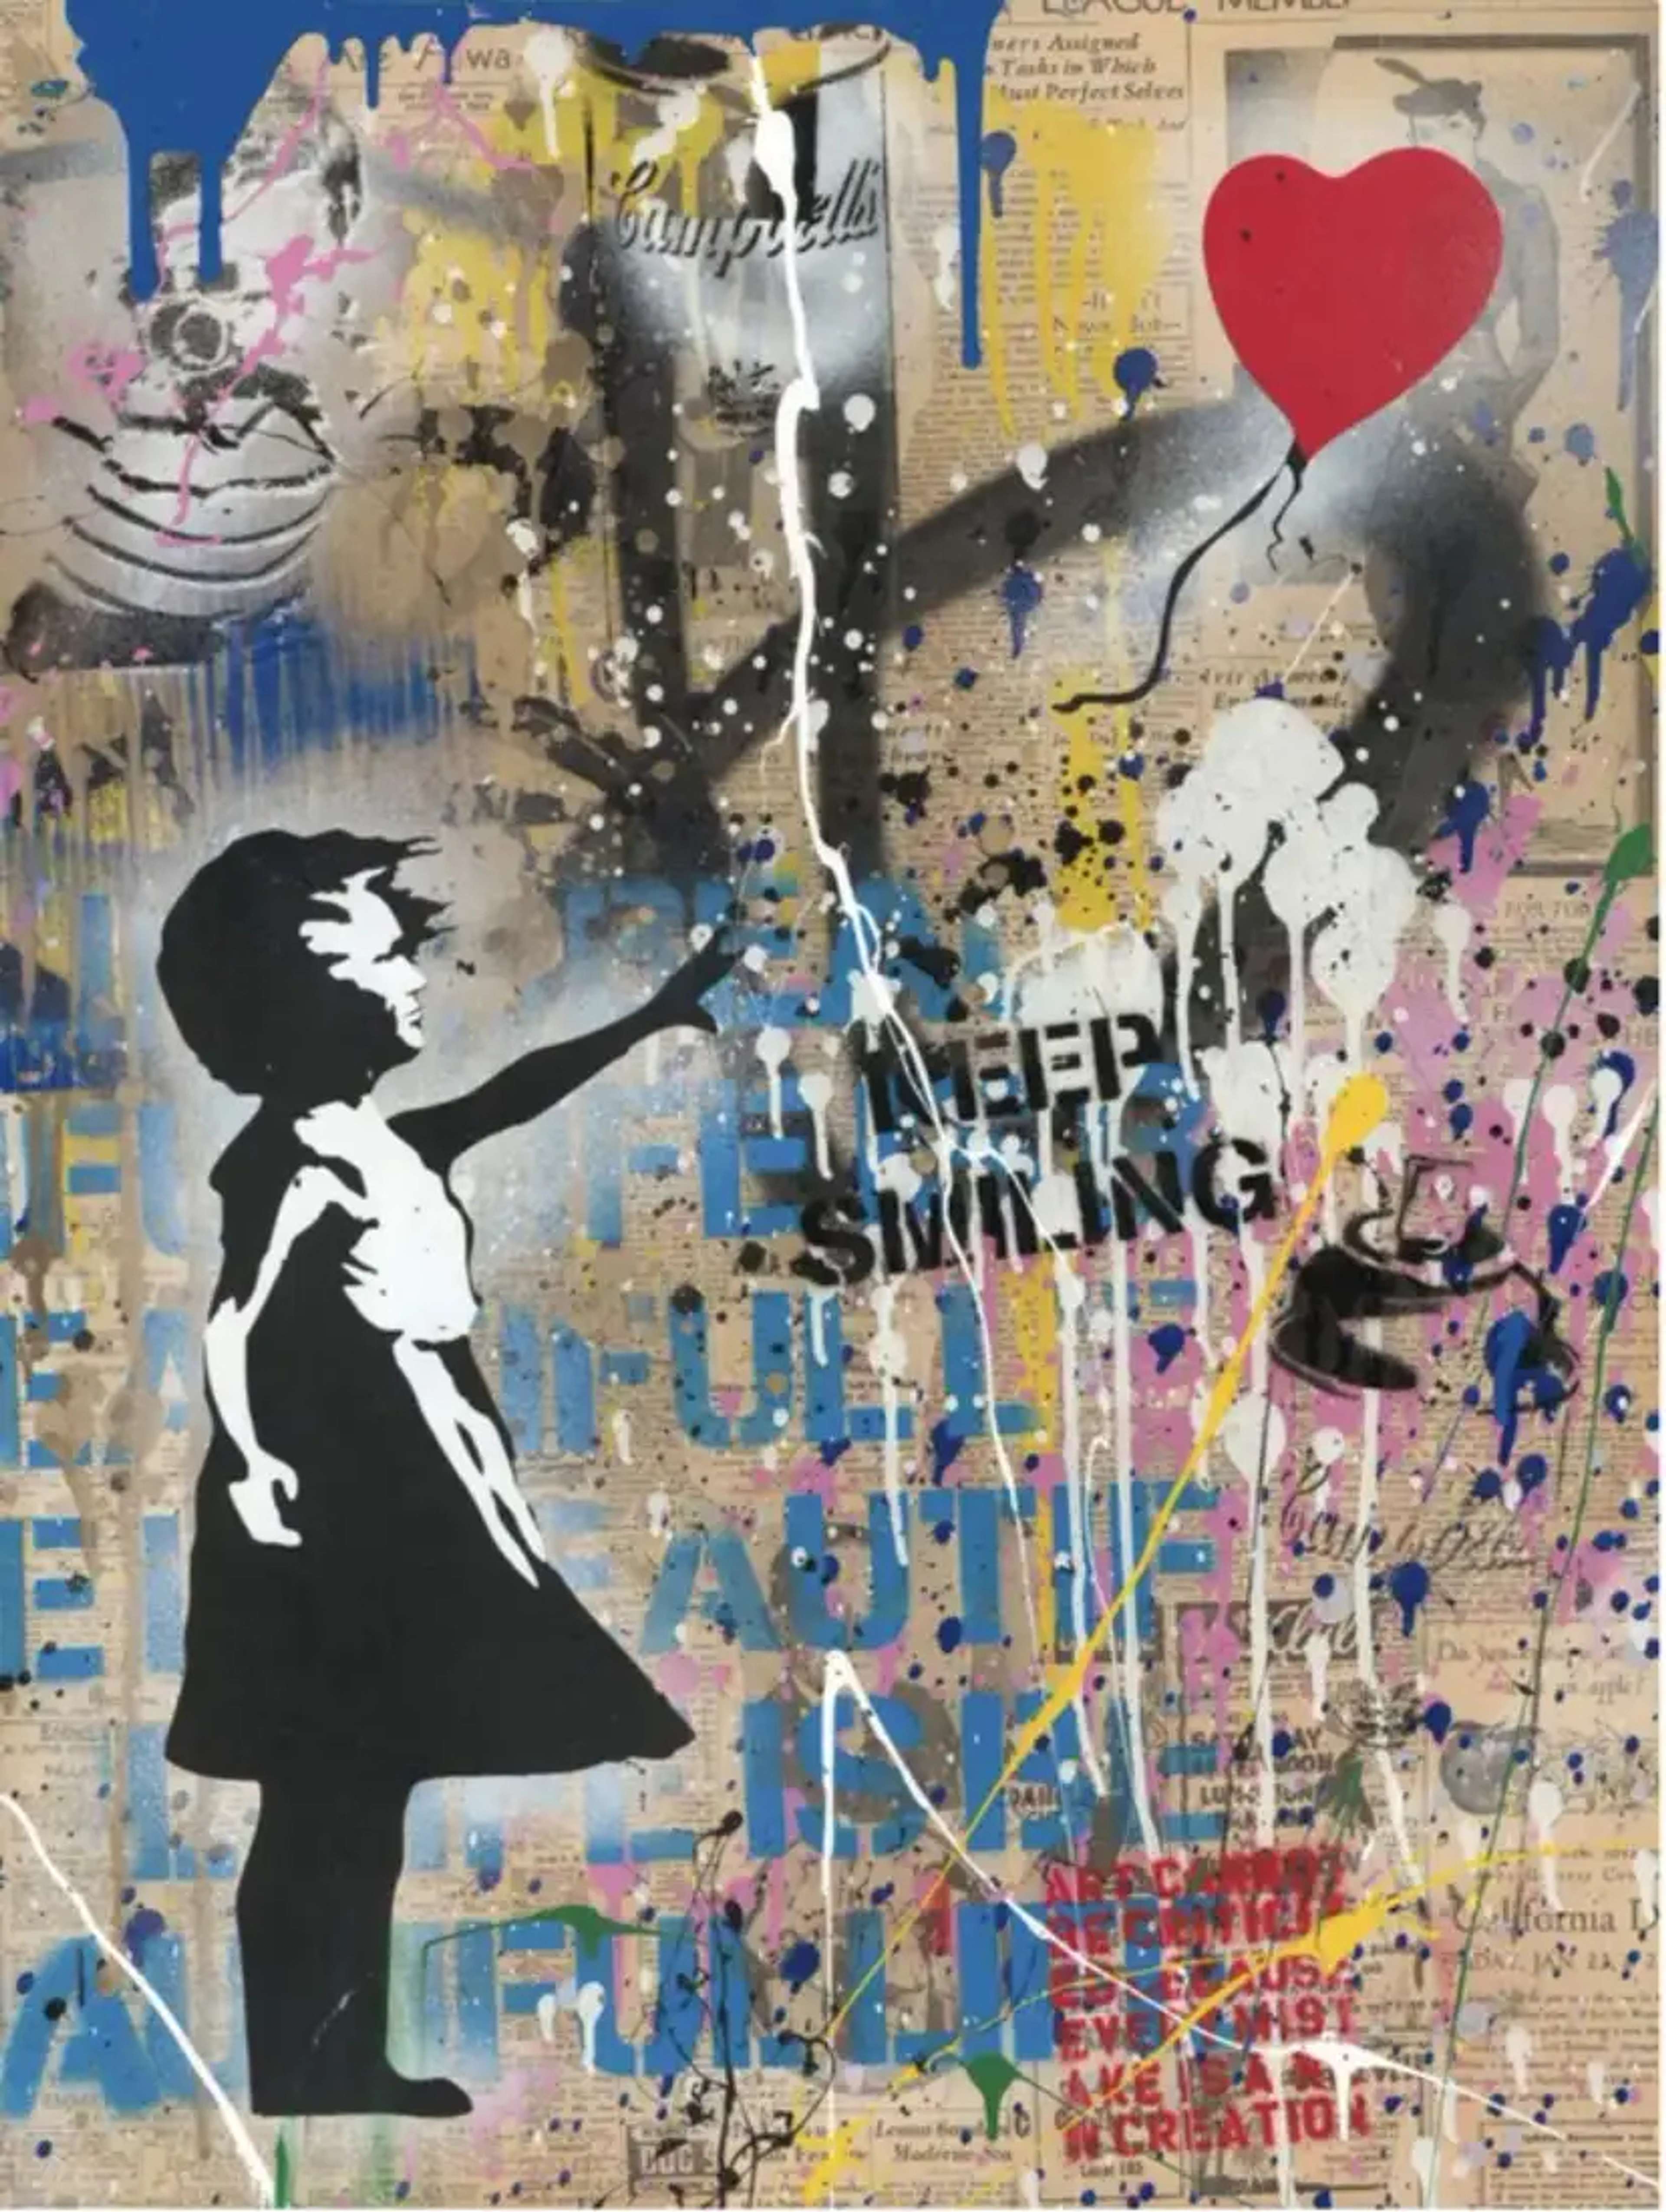 A stencil artwork by Mr. Brainwash featuring an appropriated image from street artist Banksy. The artwork depicts a young girl in a dress releasing a red heart-shaped balloon. The stencil is displayed on a vibrant graffiti-covered canvas alongside other stenciled artworks.